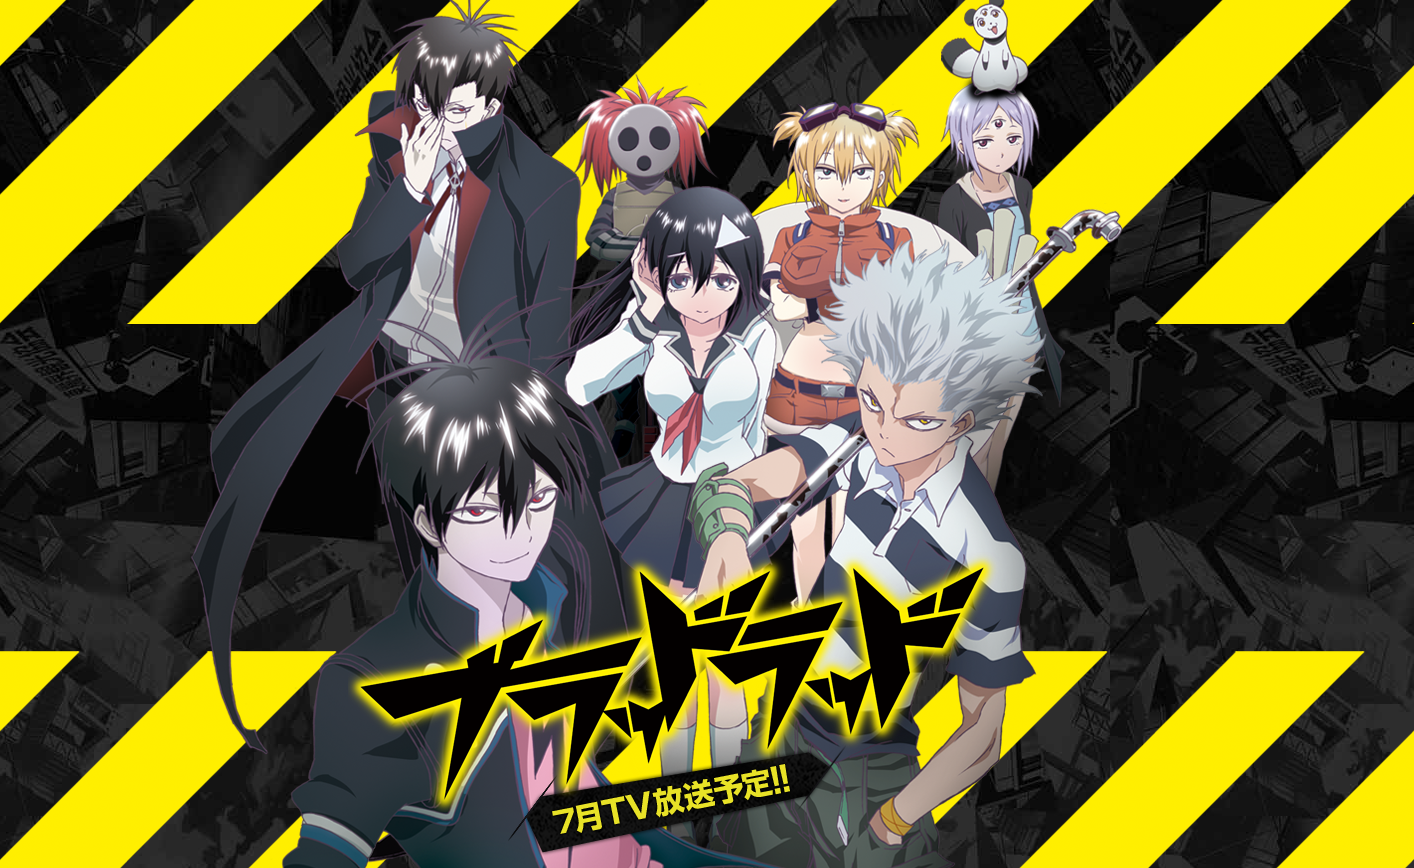 Ihate00 Critics : New Anime Review - Blood Lad